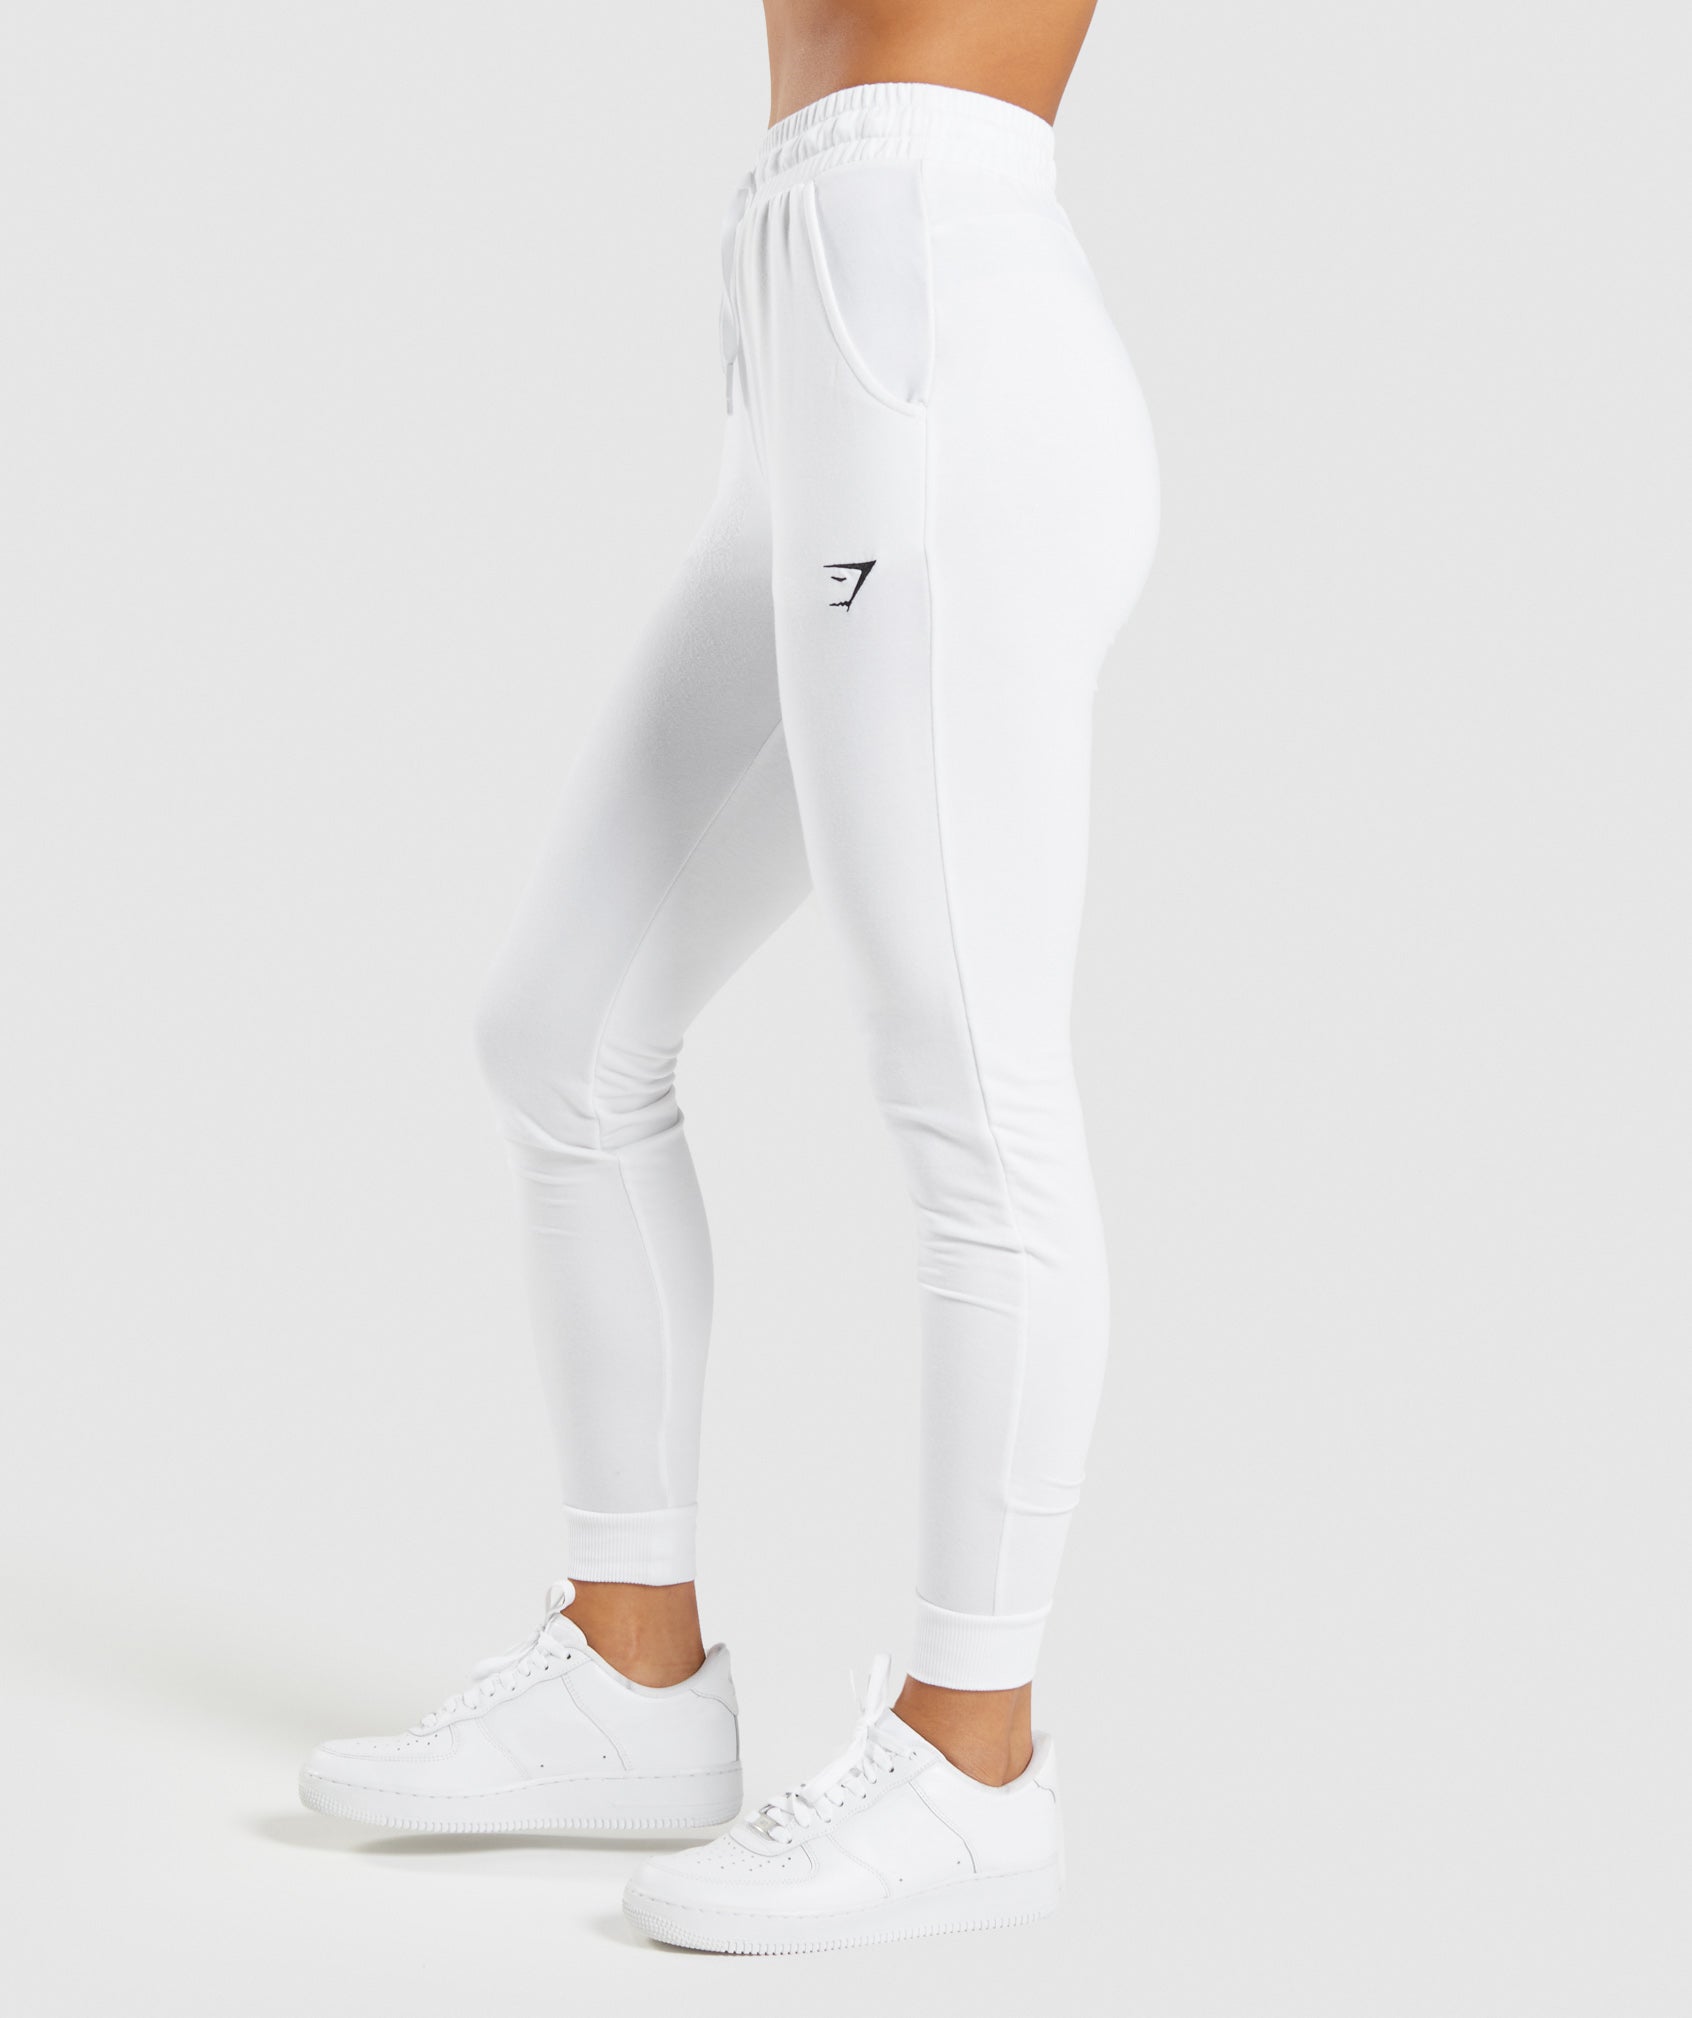 Training Pippa Joggers in White - view 4